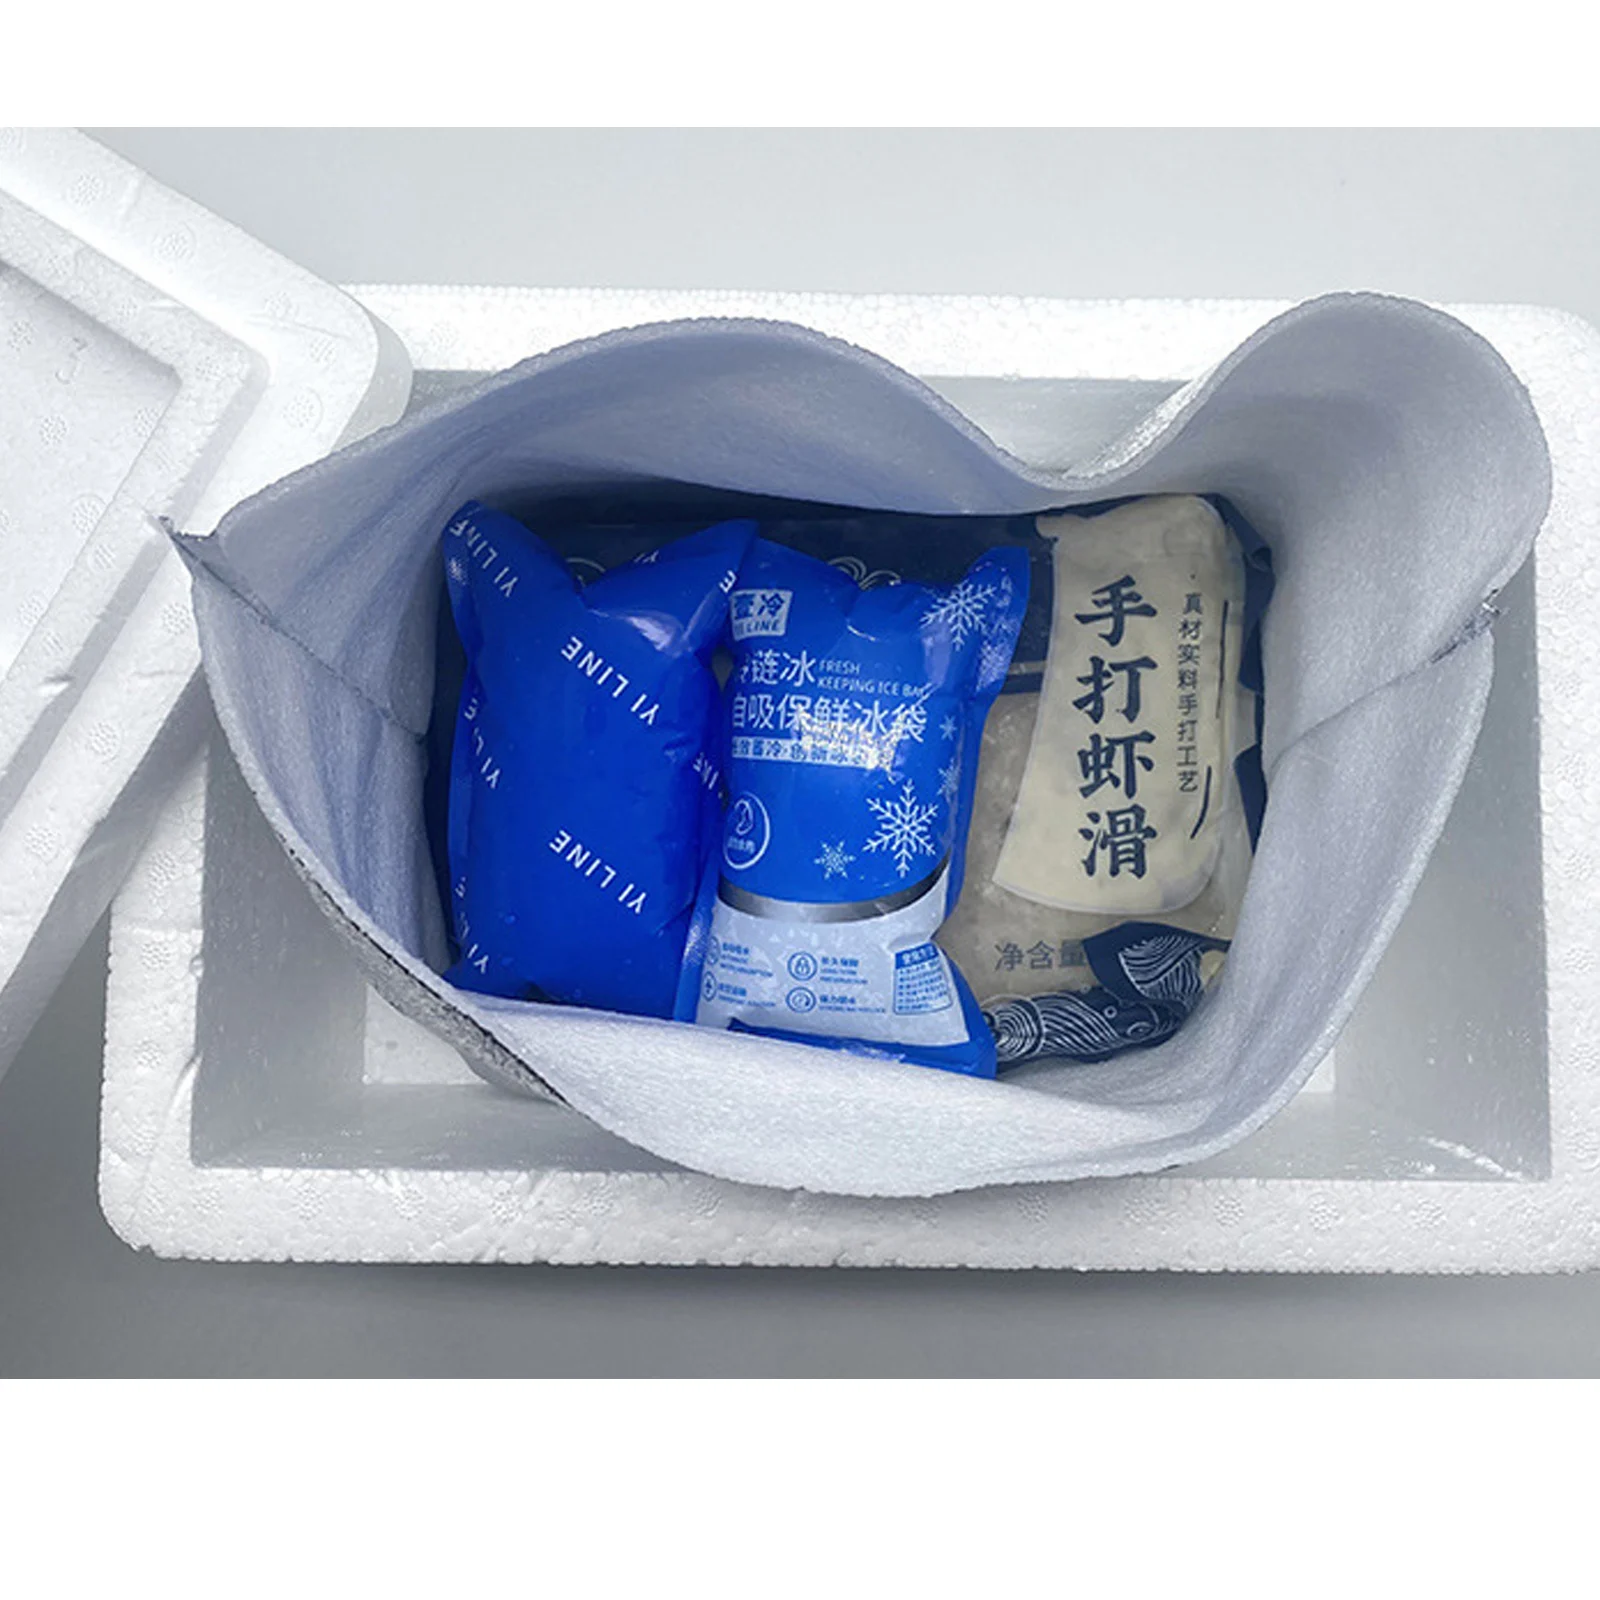 10PCS Self-priming Ice Pack Reusable Icing Cooler Bag Pain Cold Compress Drinks Refrigerate Picnic Food Keep Fresh Dry Ice Packs